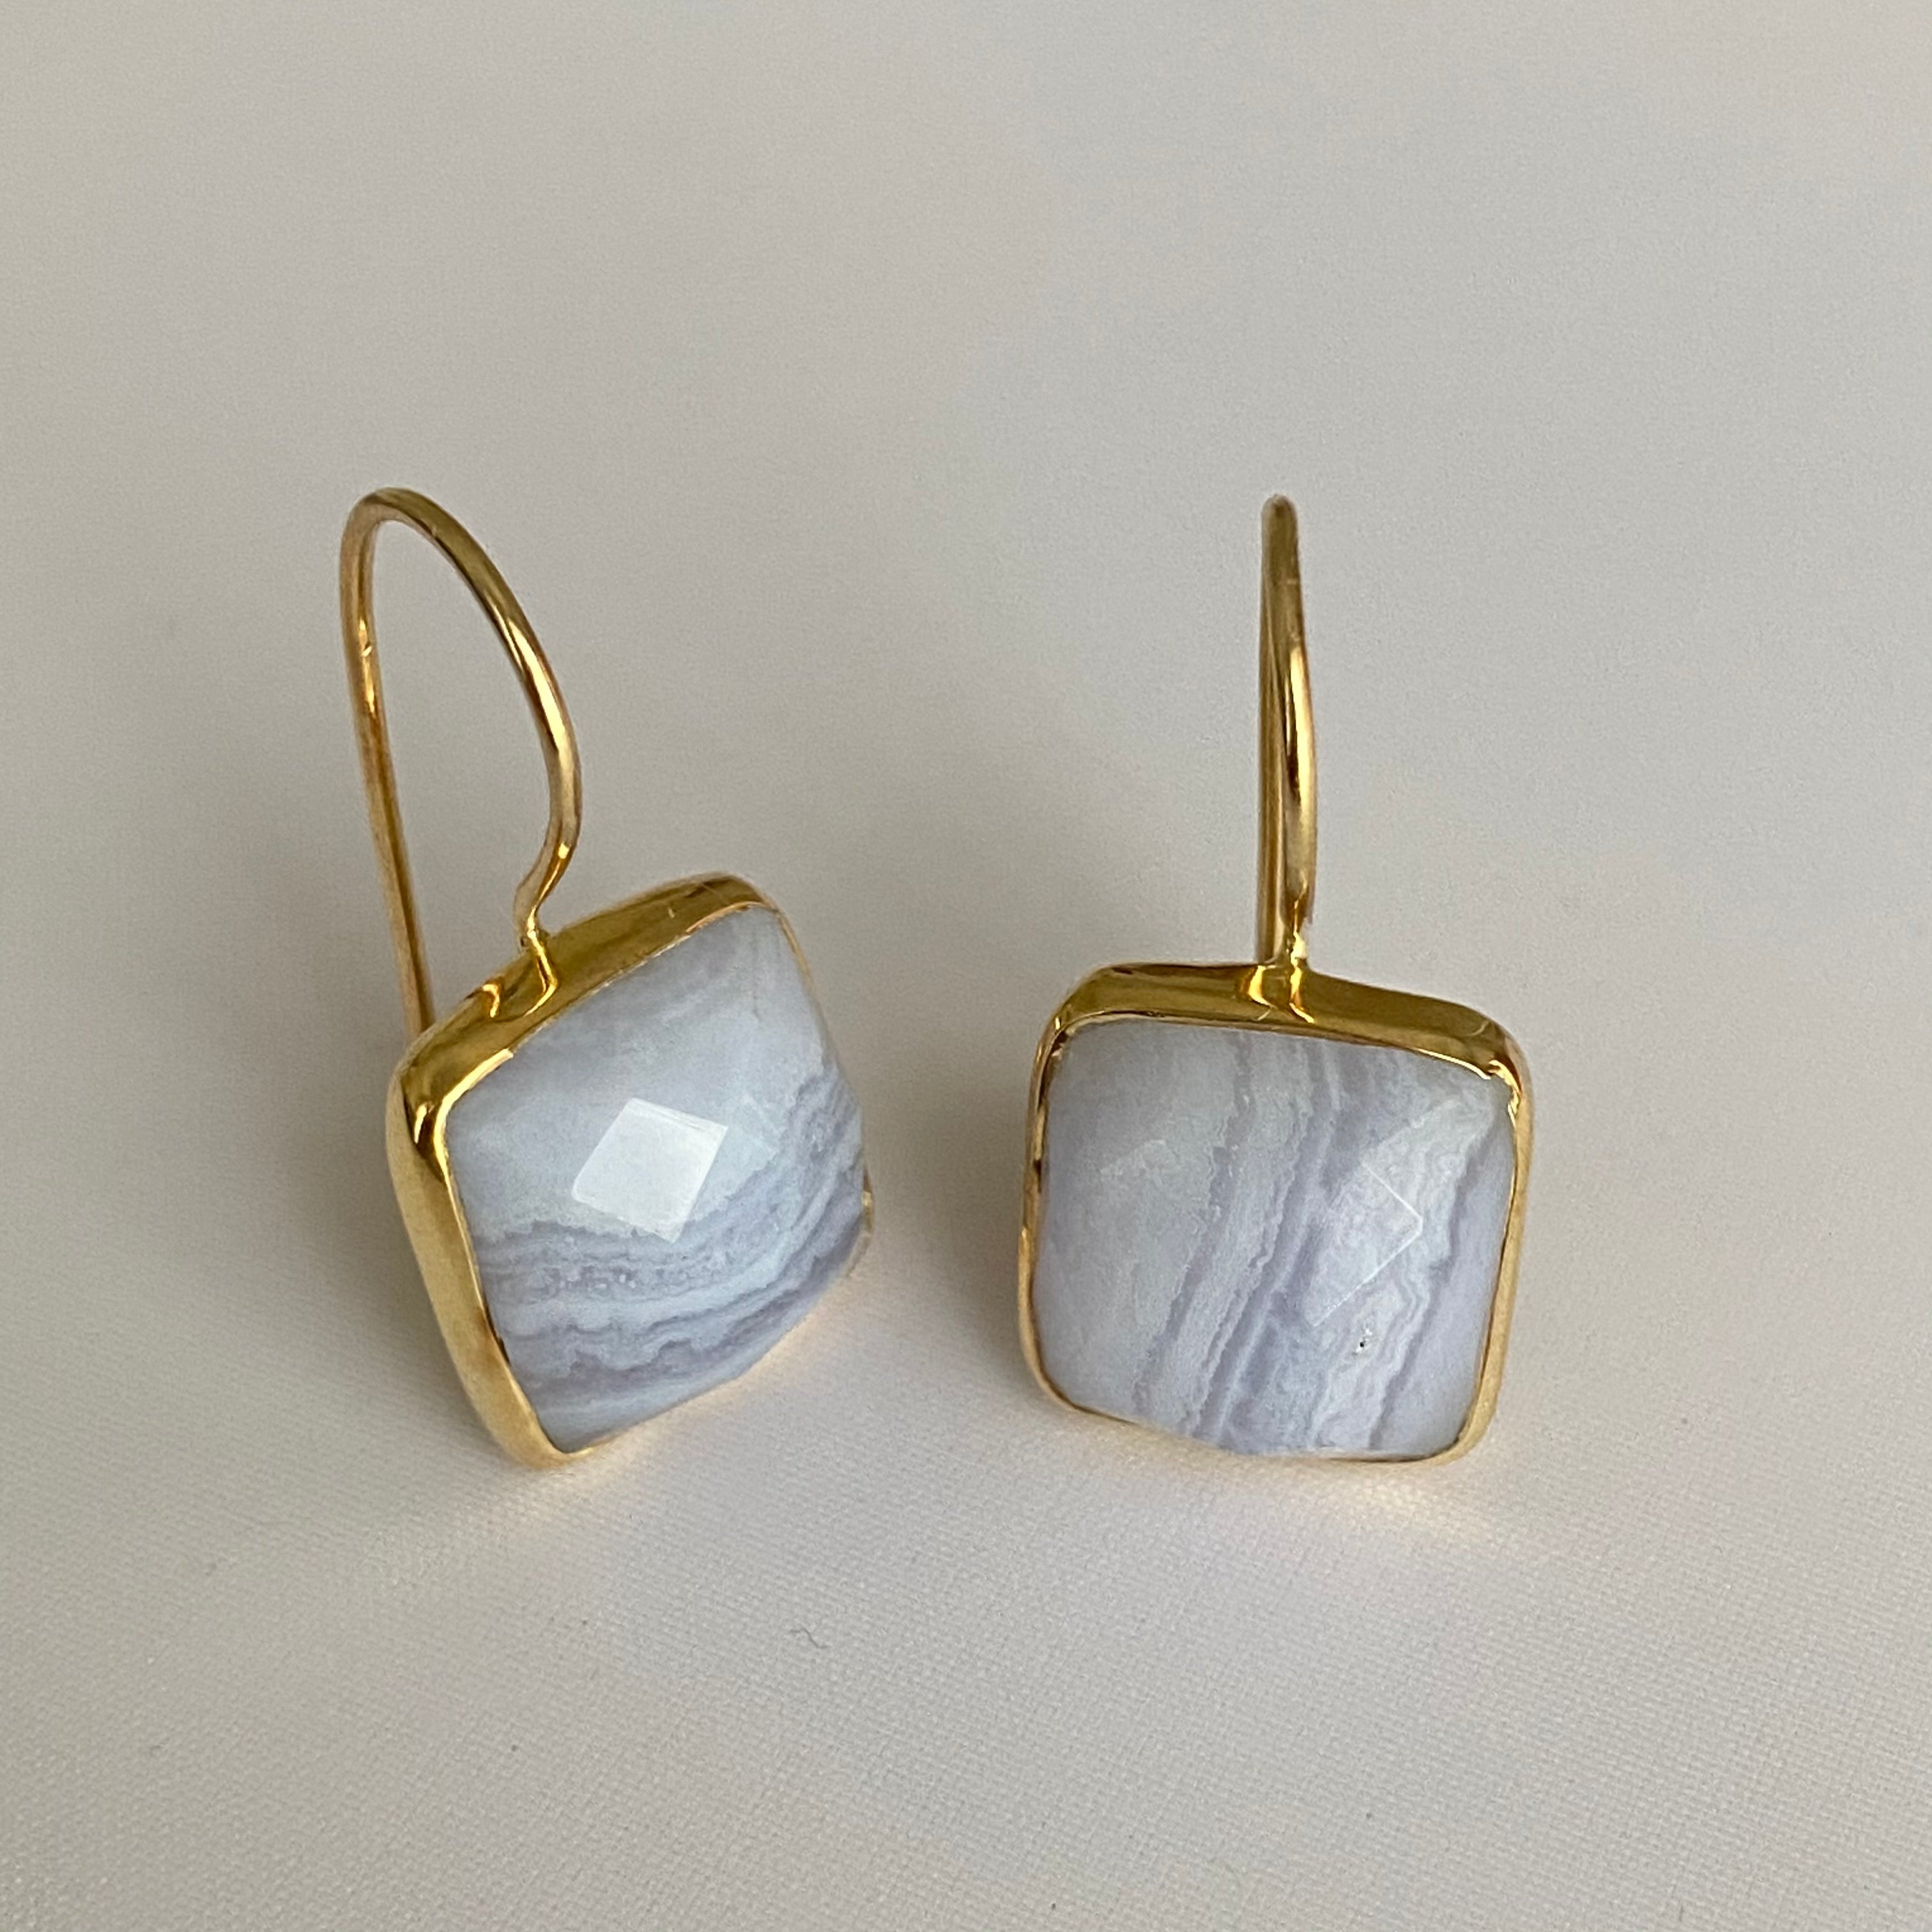 Gold Plated Sterling Silver Square Gemstone Earrings - Blue Laced Agate